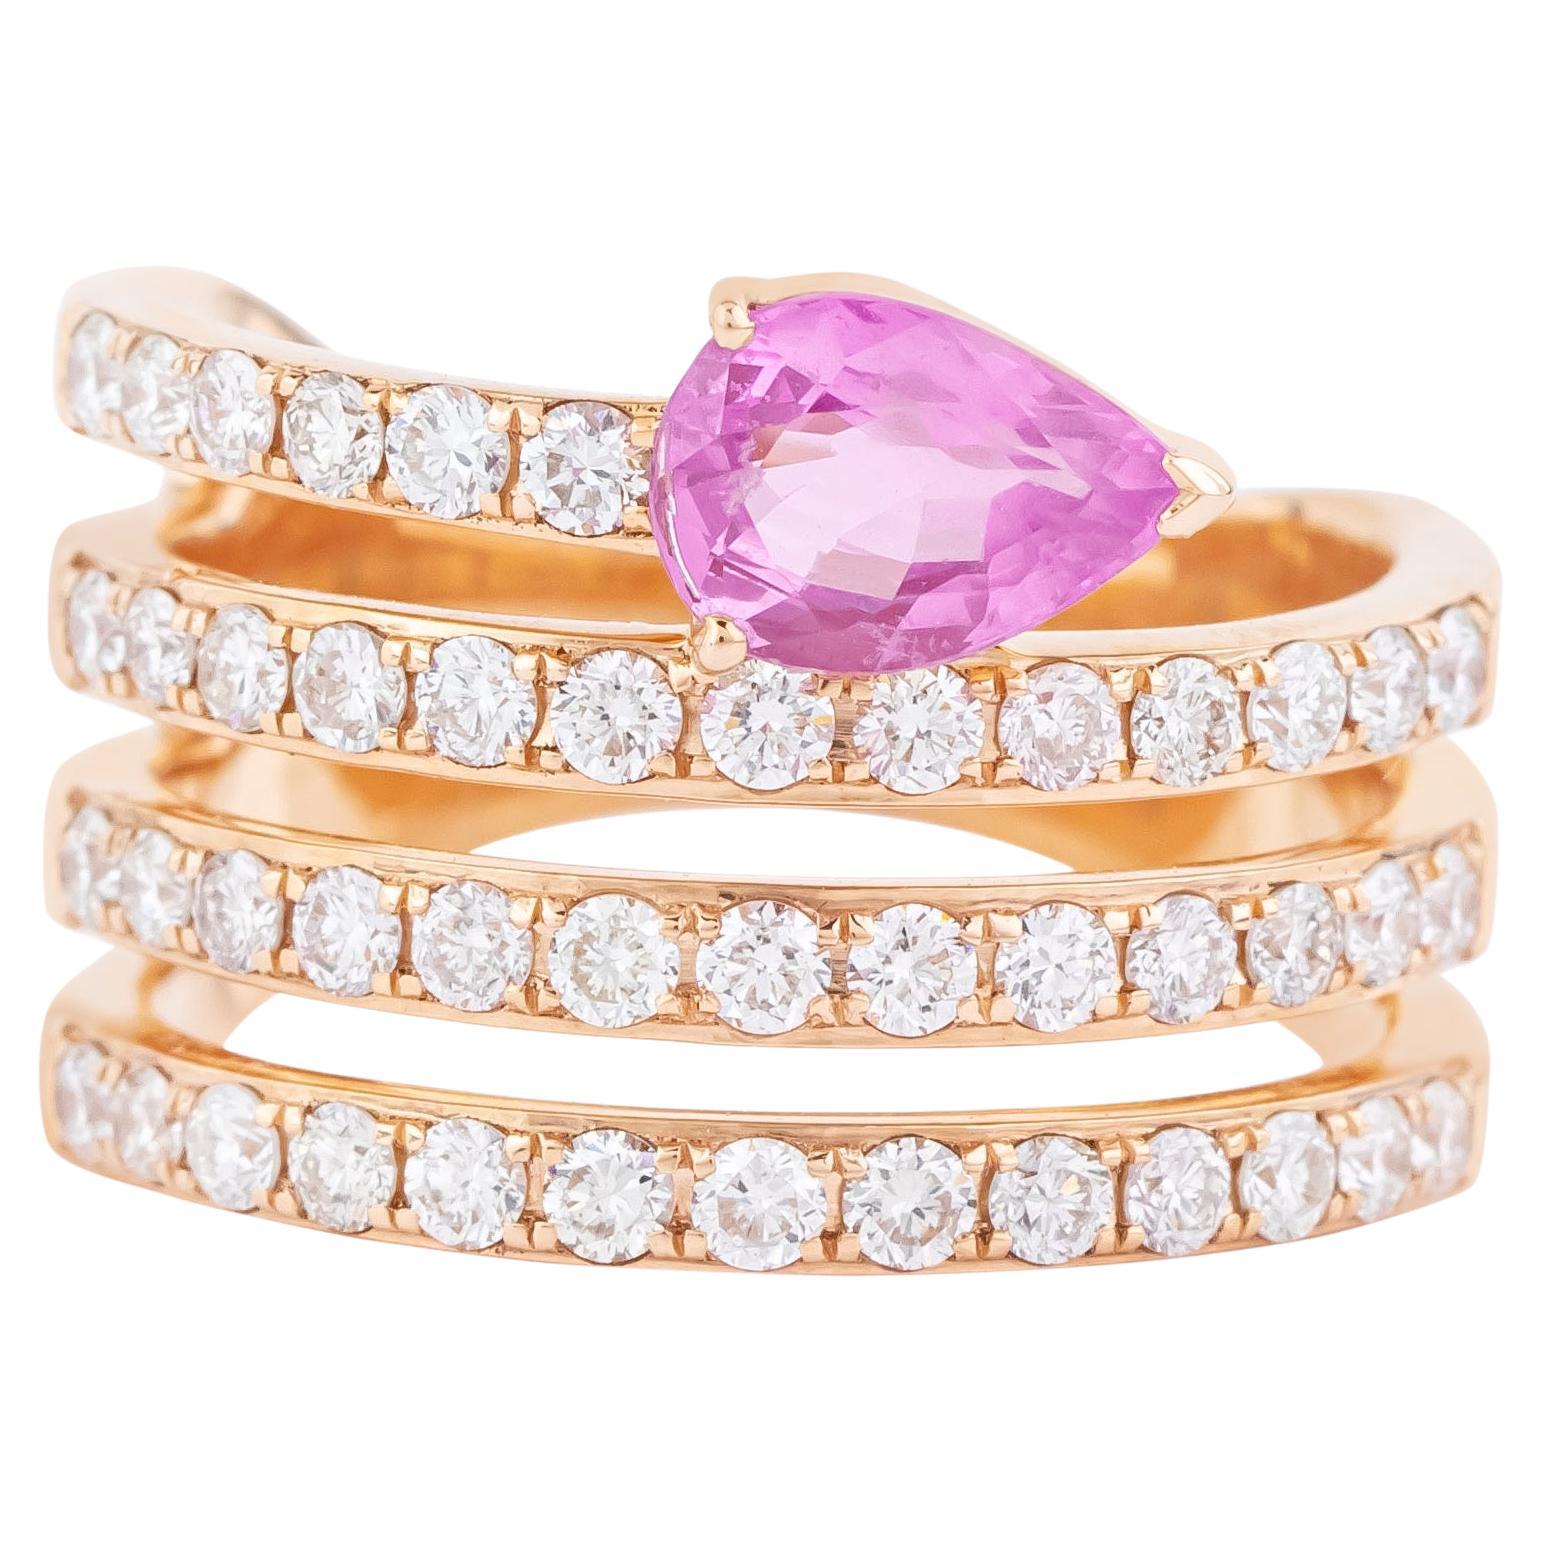 18 Karat Gold 2.24 Carat Diamond and Pink Sapphire Cocktail Ring For Sale